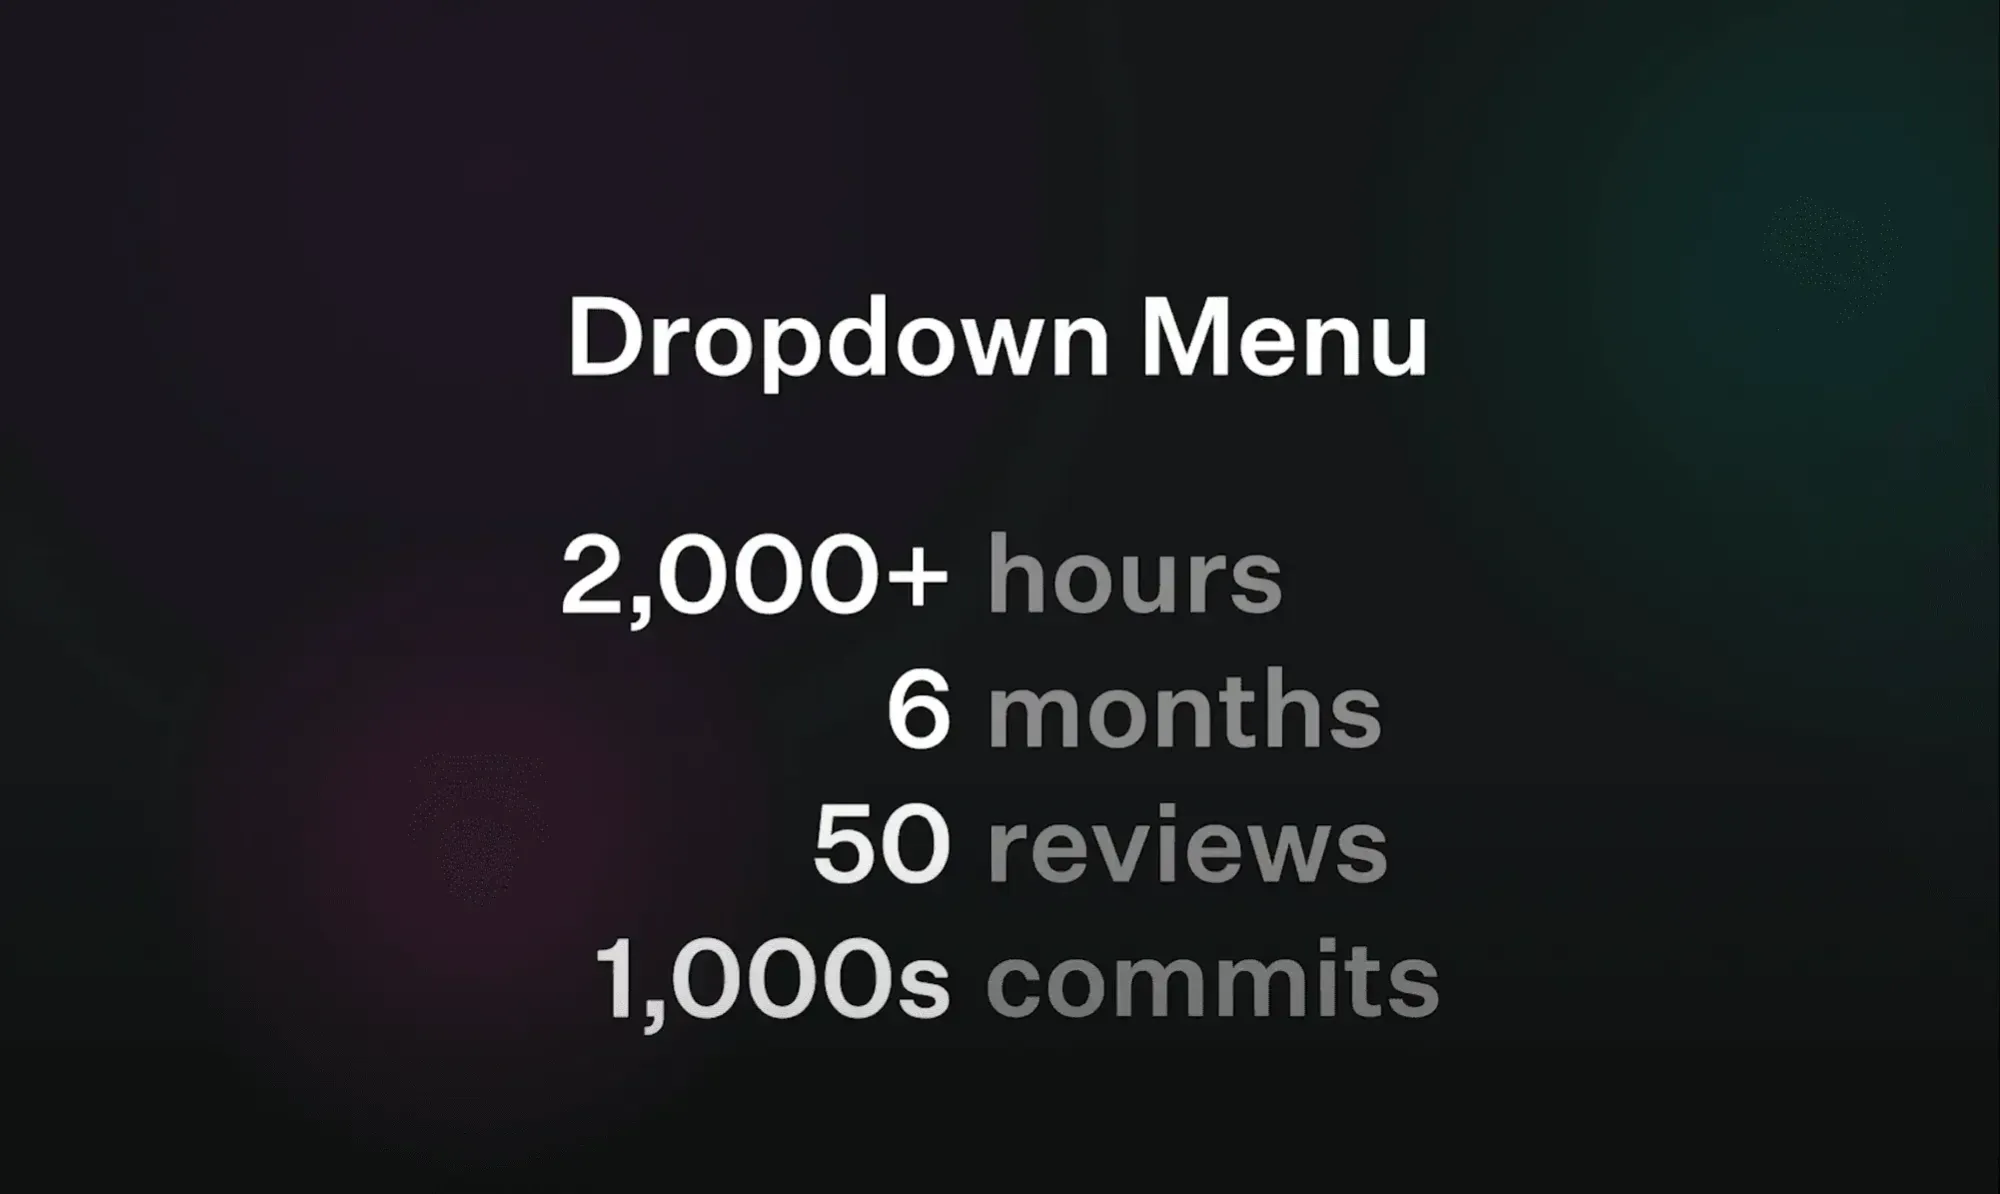 Black Screen with white and green letters on it saying "Dropdown Menu 2,000+ hours, 6 months, 50 reviews, 1,000s commits".